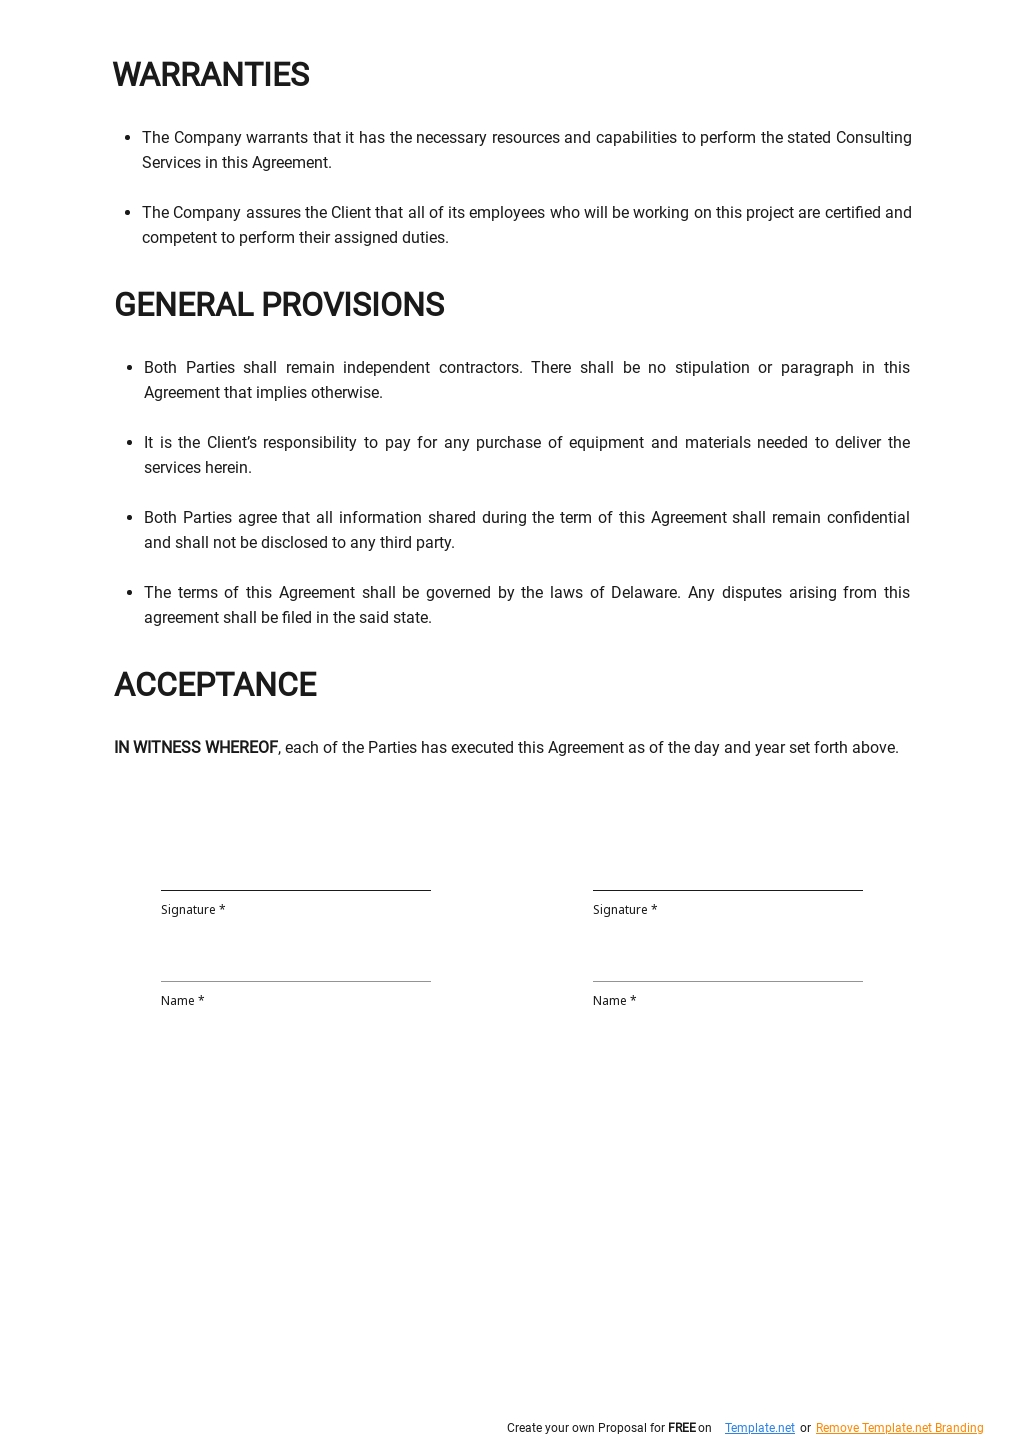 Nonprofit Consulting Agreement Template 2.jpe